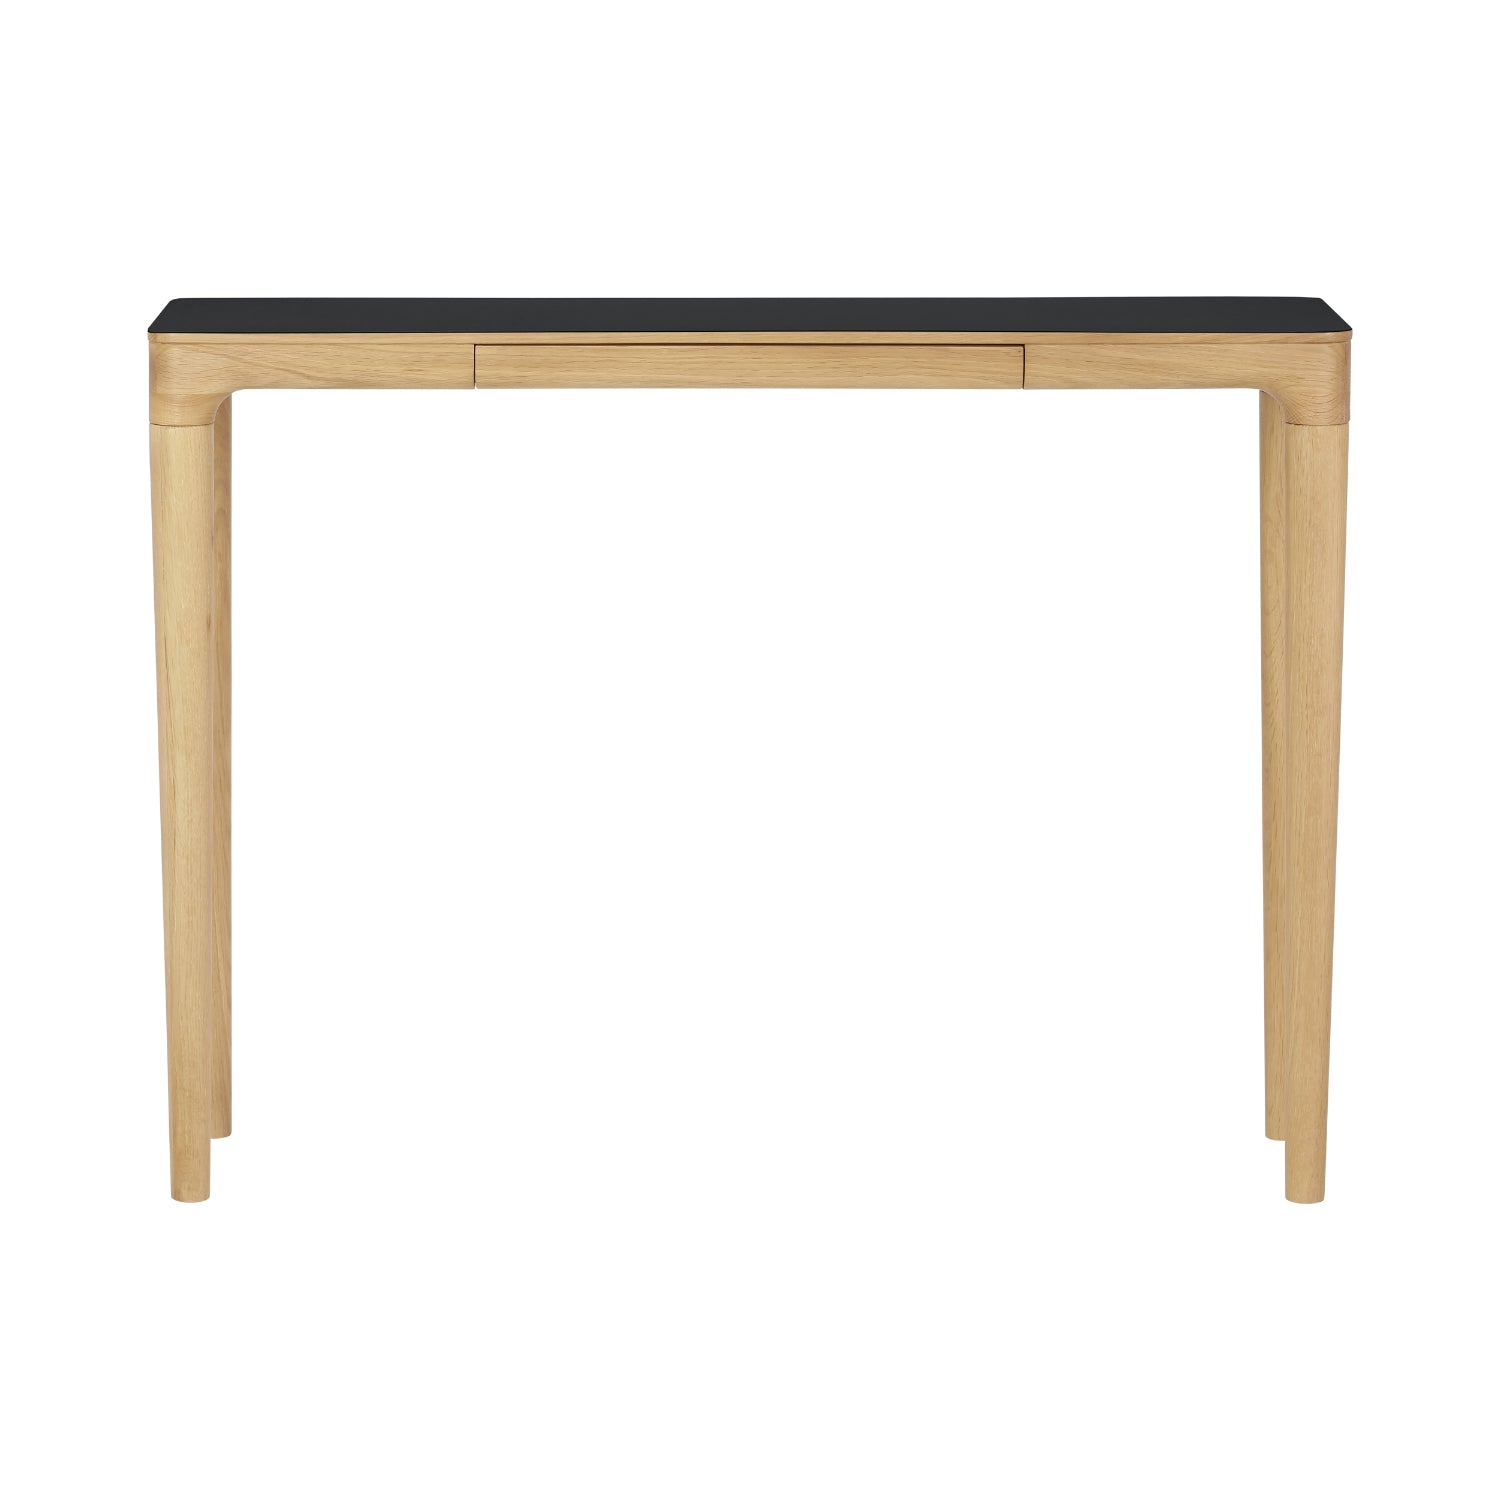 UMAGE - Heart'n'Soul Console Table